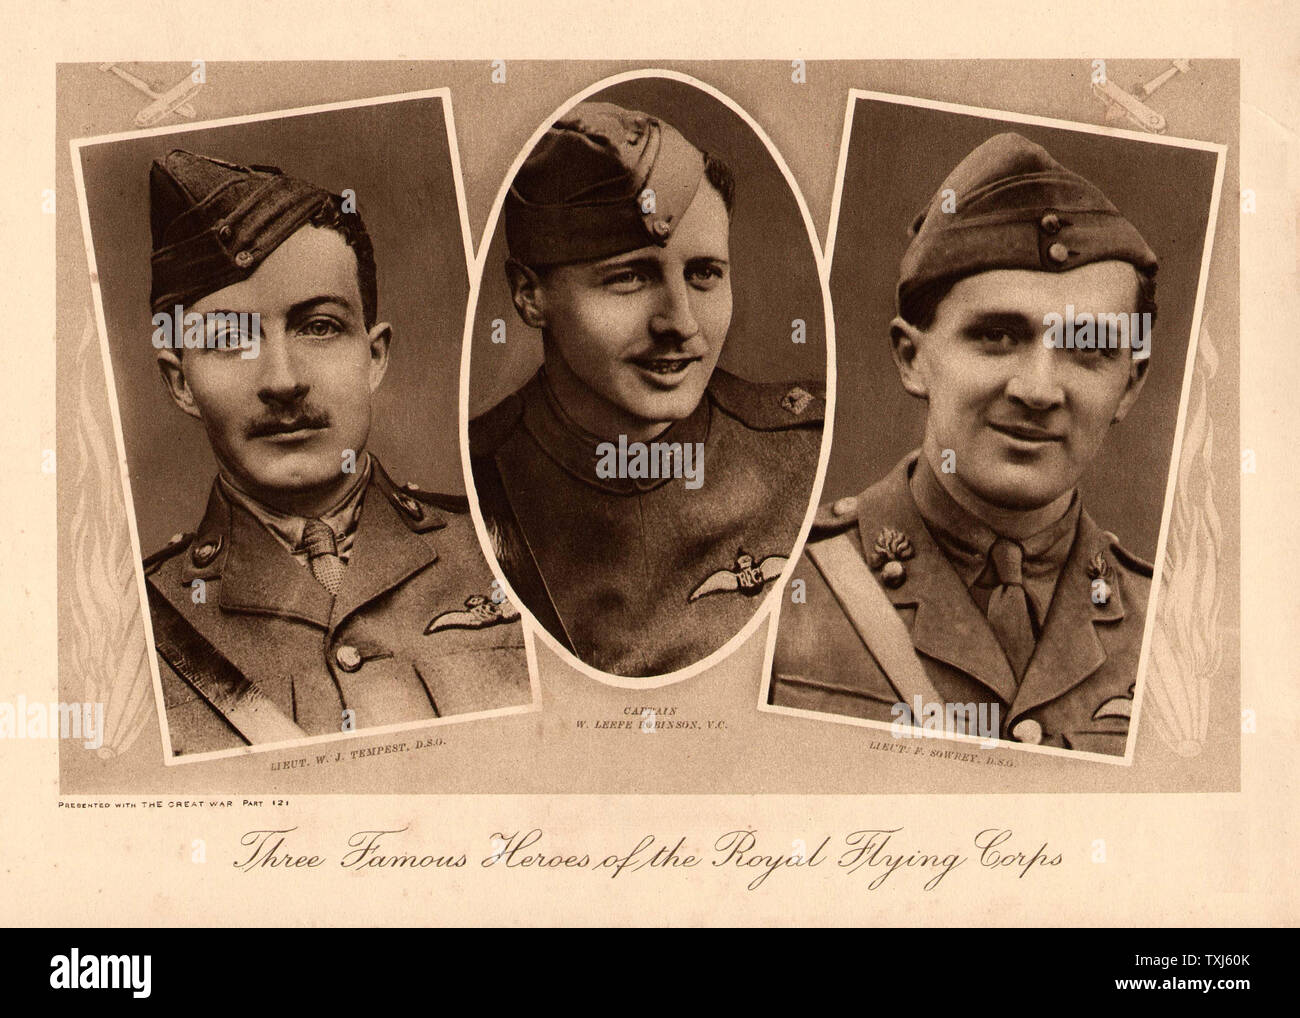 1916 The Great War page Cpt. Leefe Robinson, Lt. Wulstan Tempest & Lt. Sowrey, Zeppelin Victories Flying Corps Stock Photo